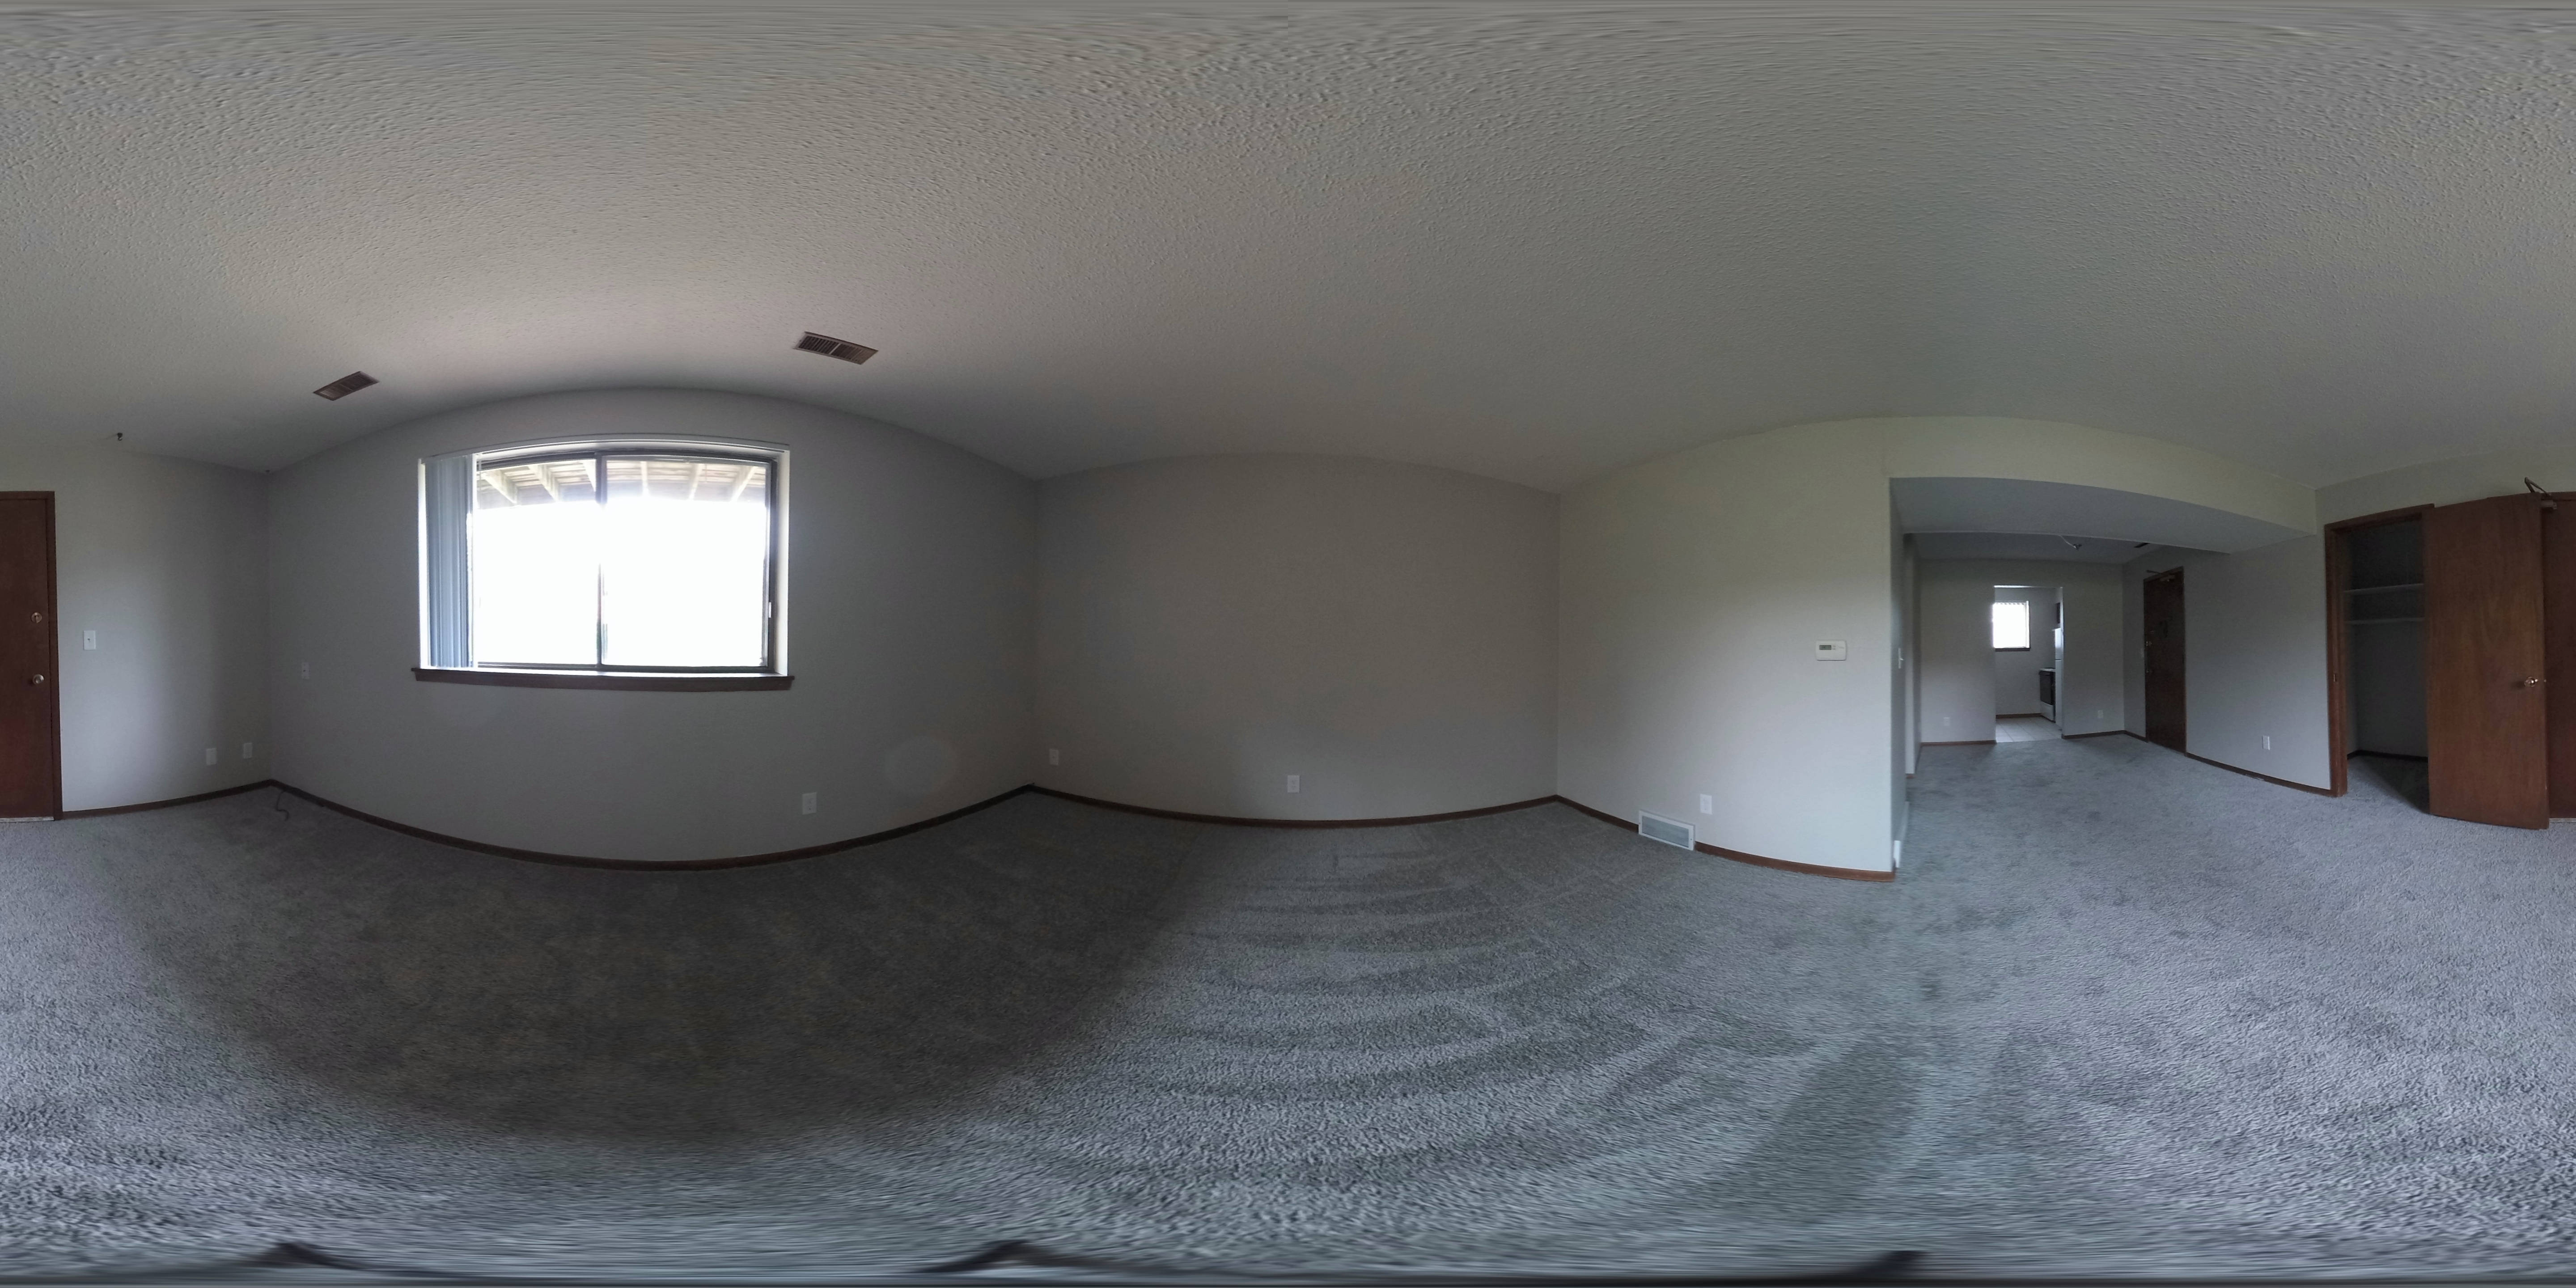 Spinning 360 image of an apartment living room